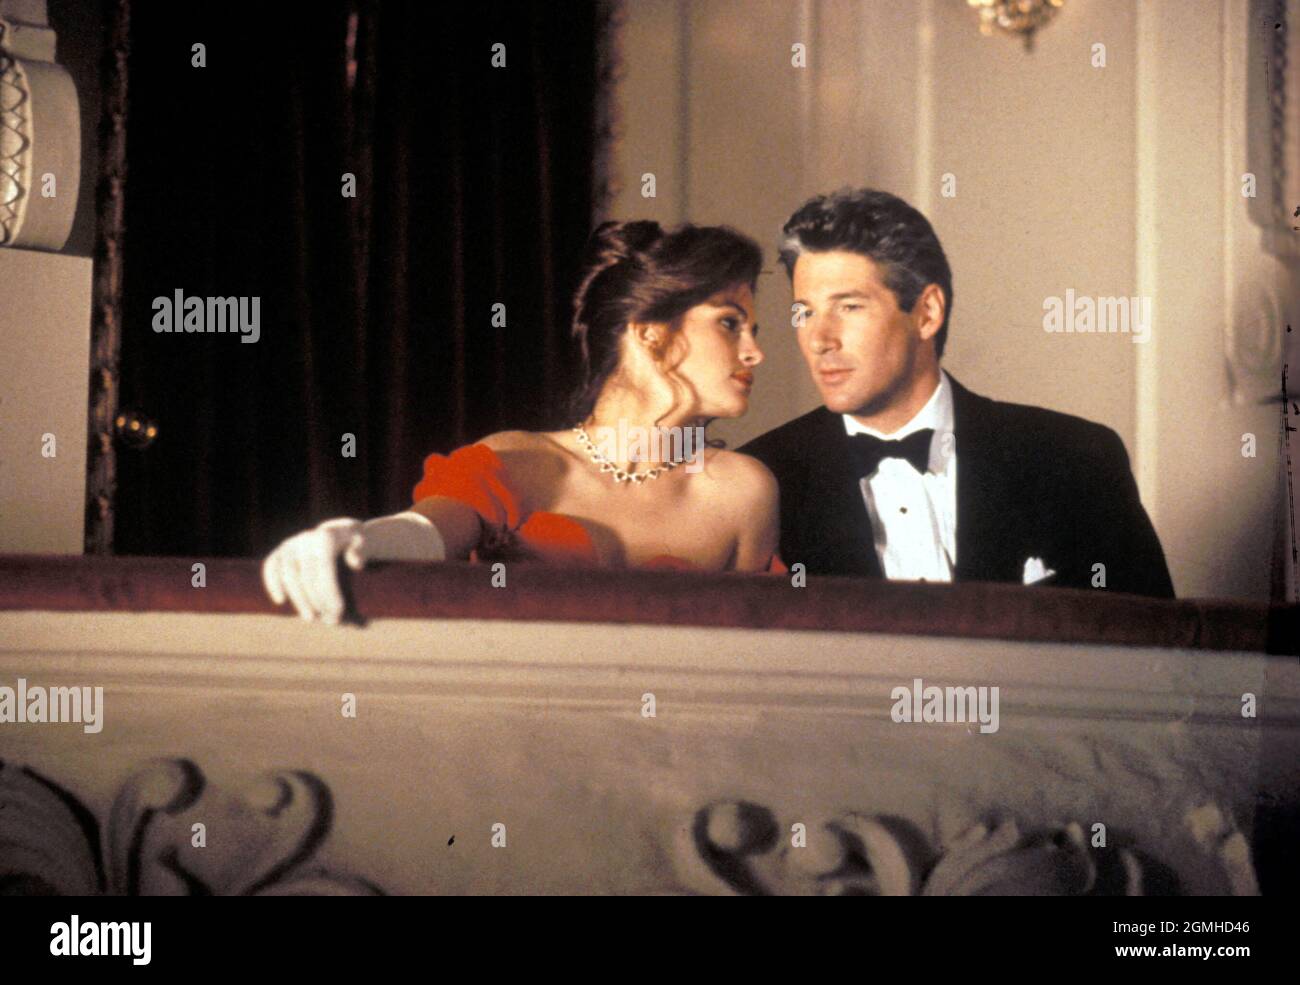 JULIA ROBERTS and RICHARD GERE in PRETTY WOMAN (1990), directed by GARRY MARSHALL. Credit: TOUCHSTONE/WARNERS / Album Stock Photo